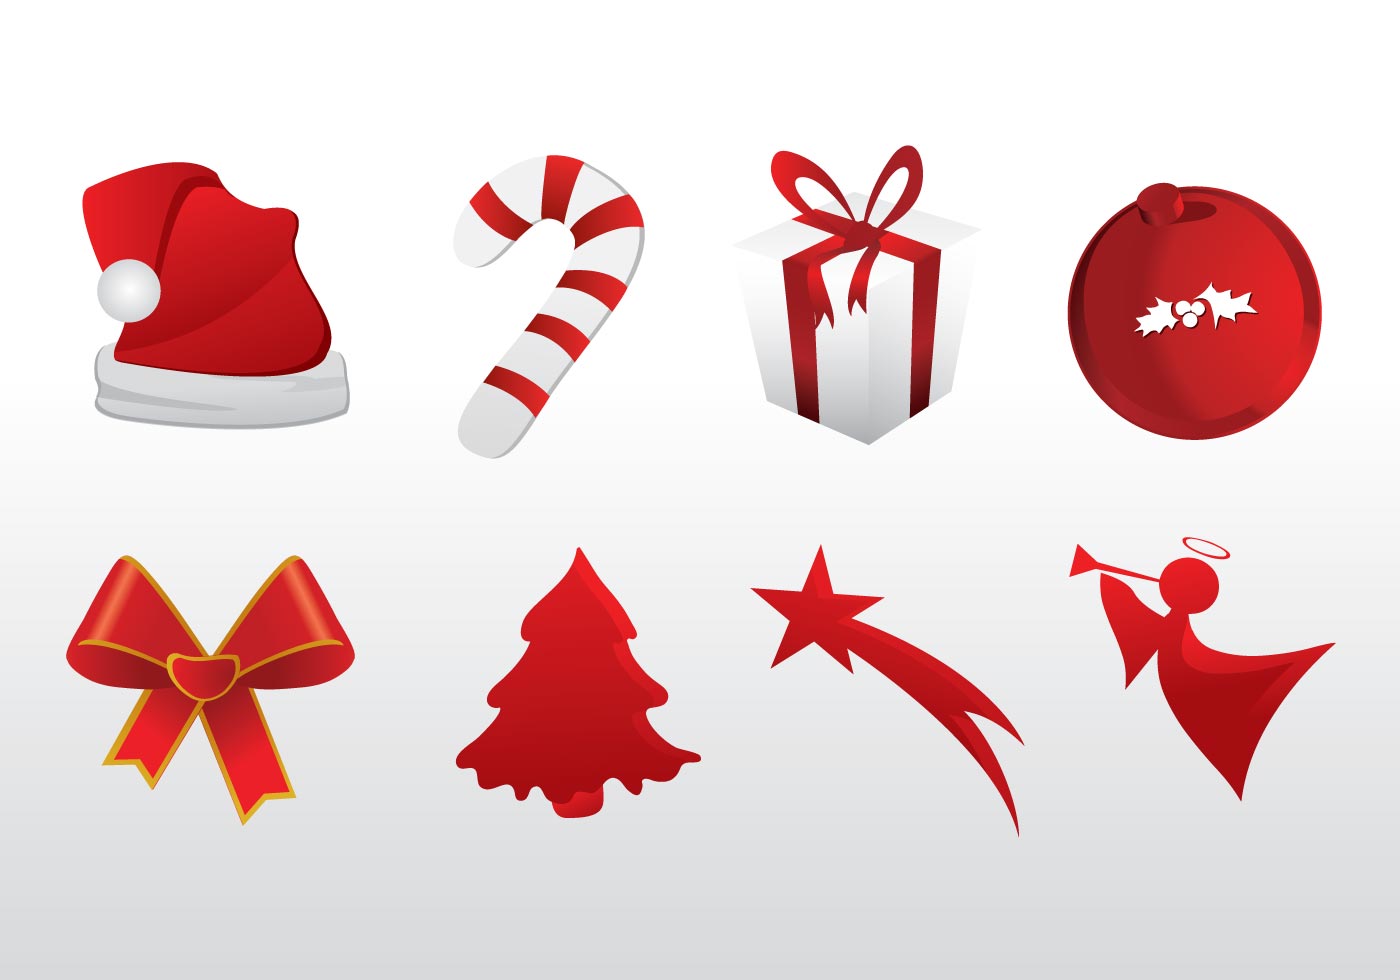 Download Free Vector Christmas Icons - Download Free Vector Art ...